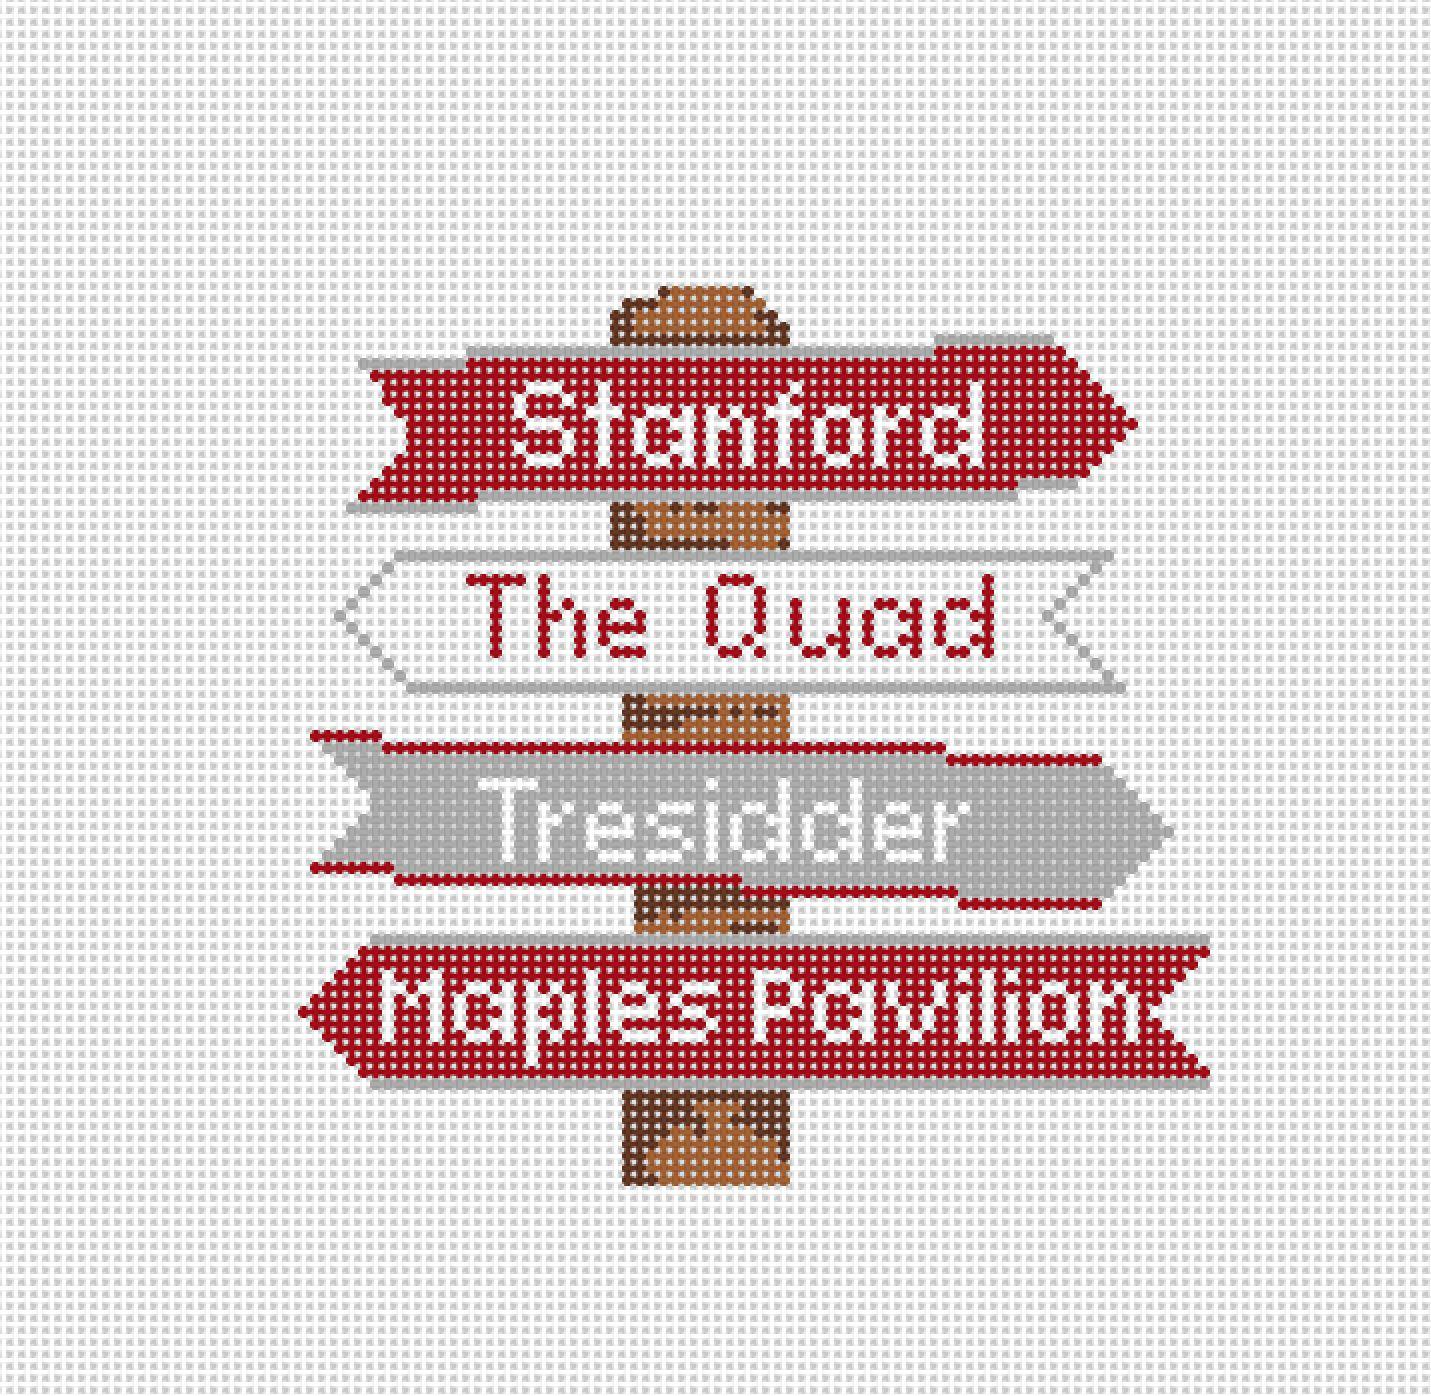 Stanford College Icon Destination Sign - Needlepoint by Laura